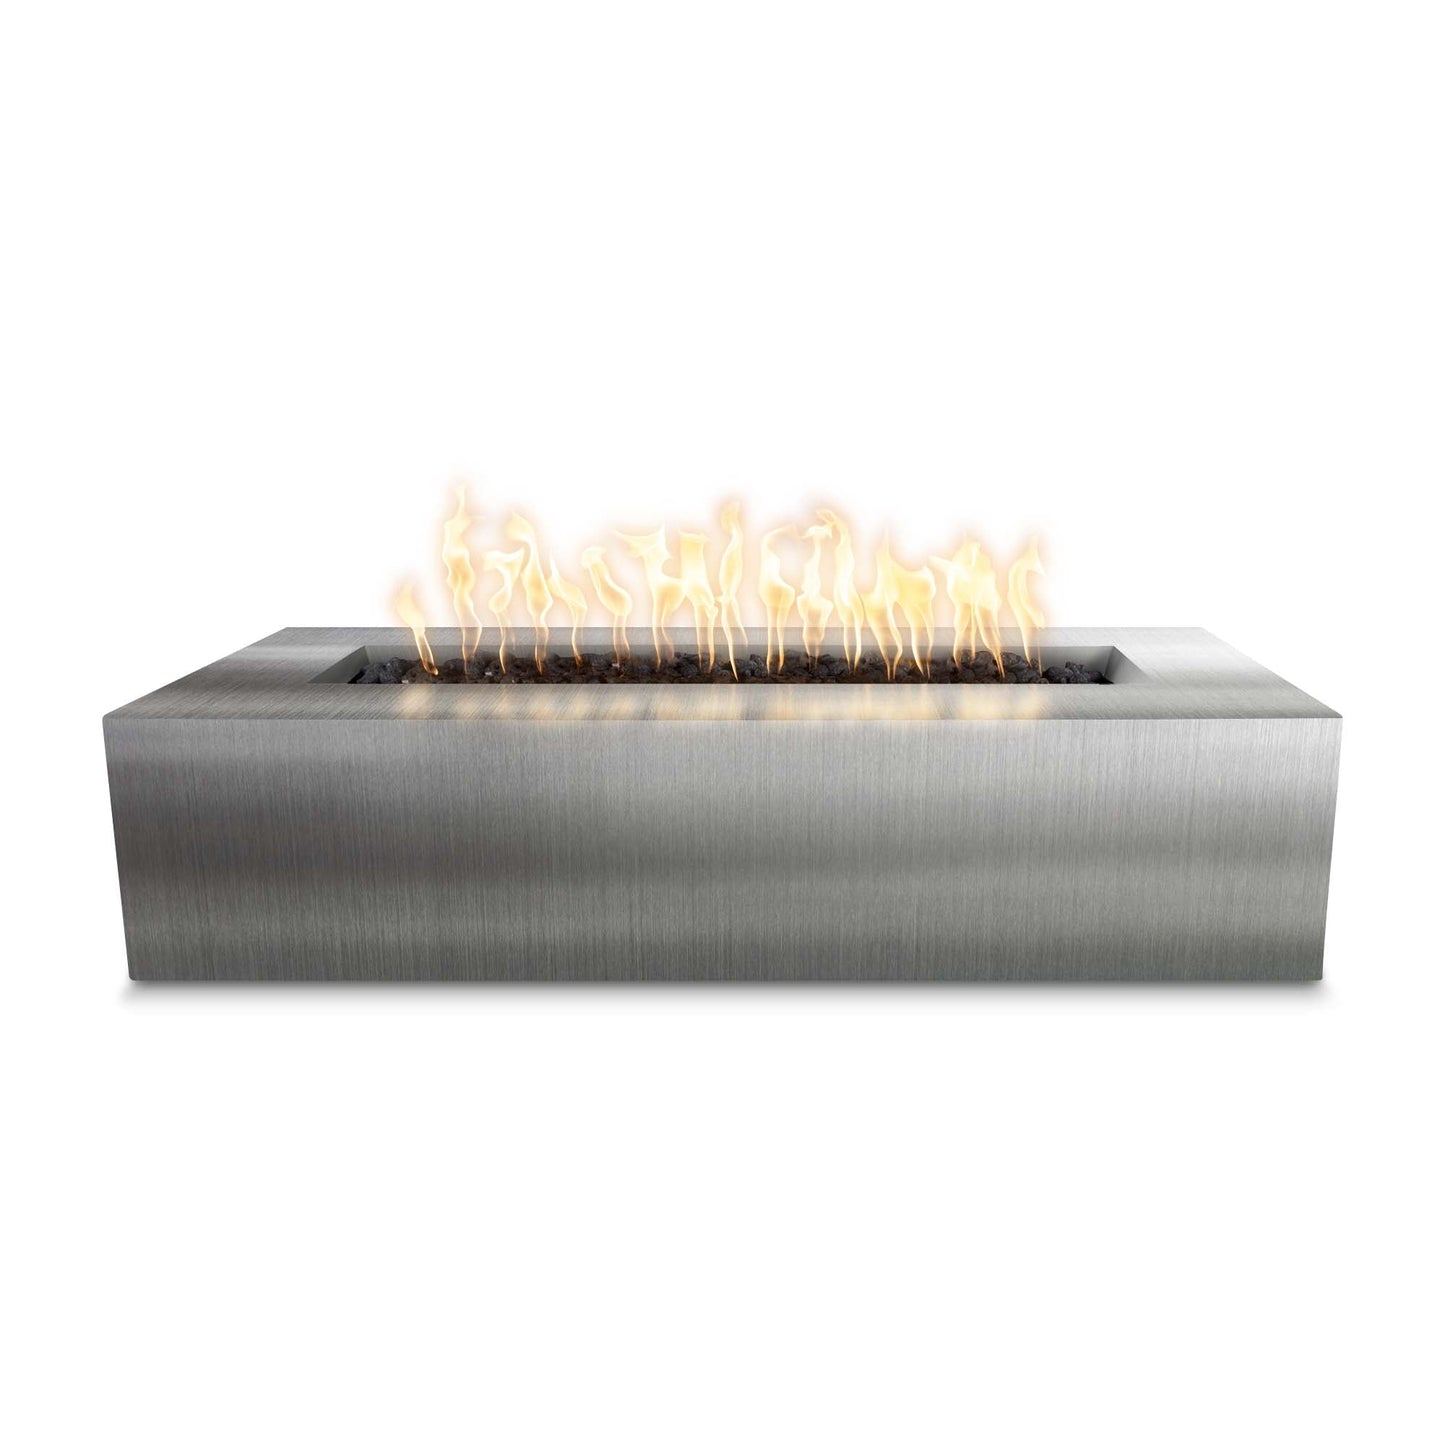 The Outdoor Plus Rectangular Regal 60" Stainless Steel Natural Gas Fire Pit with Flame Sense with Spark Ignition